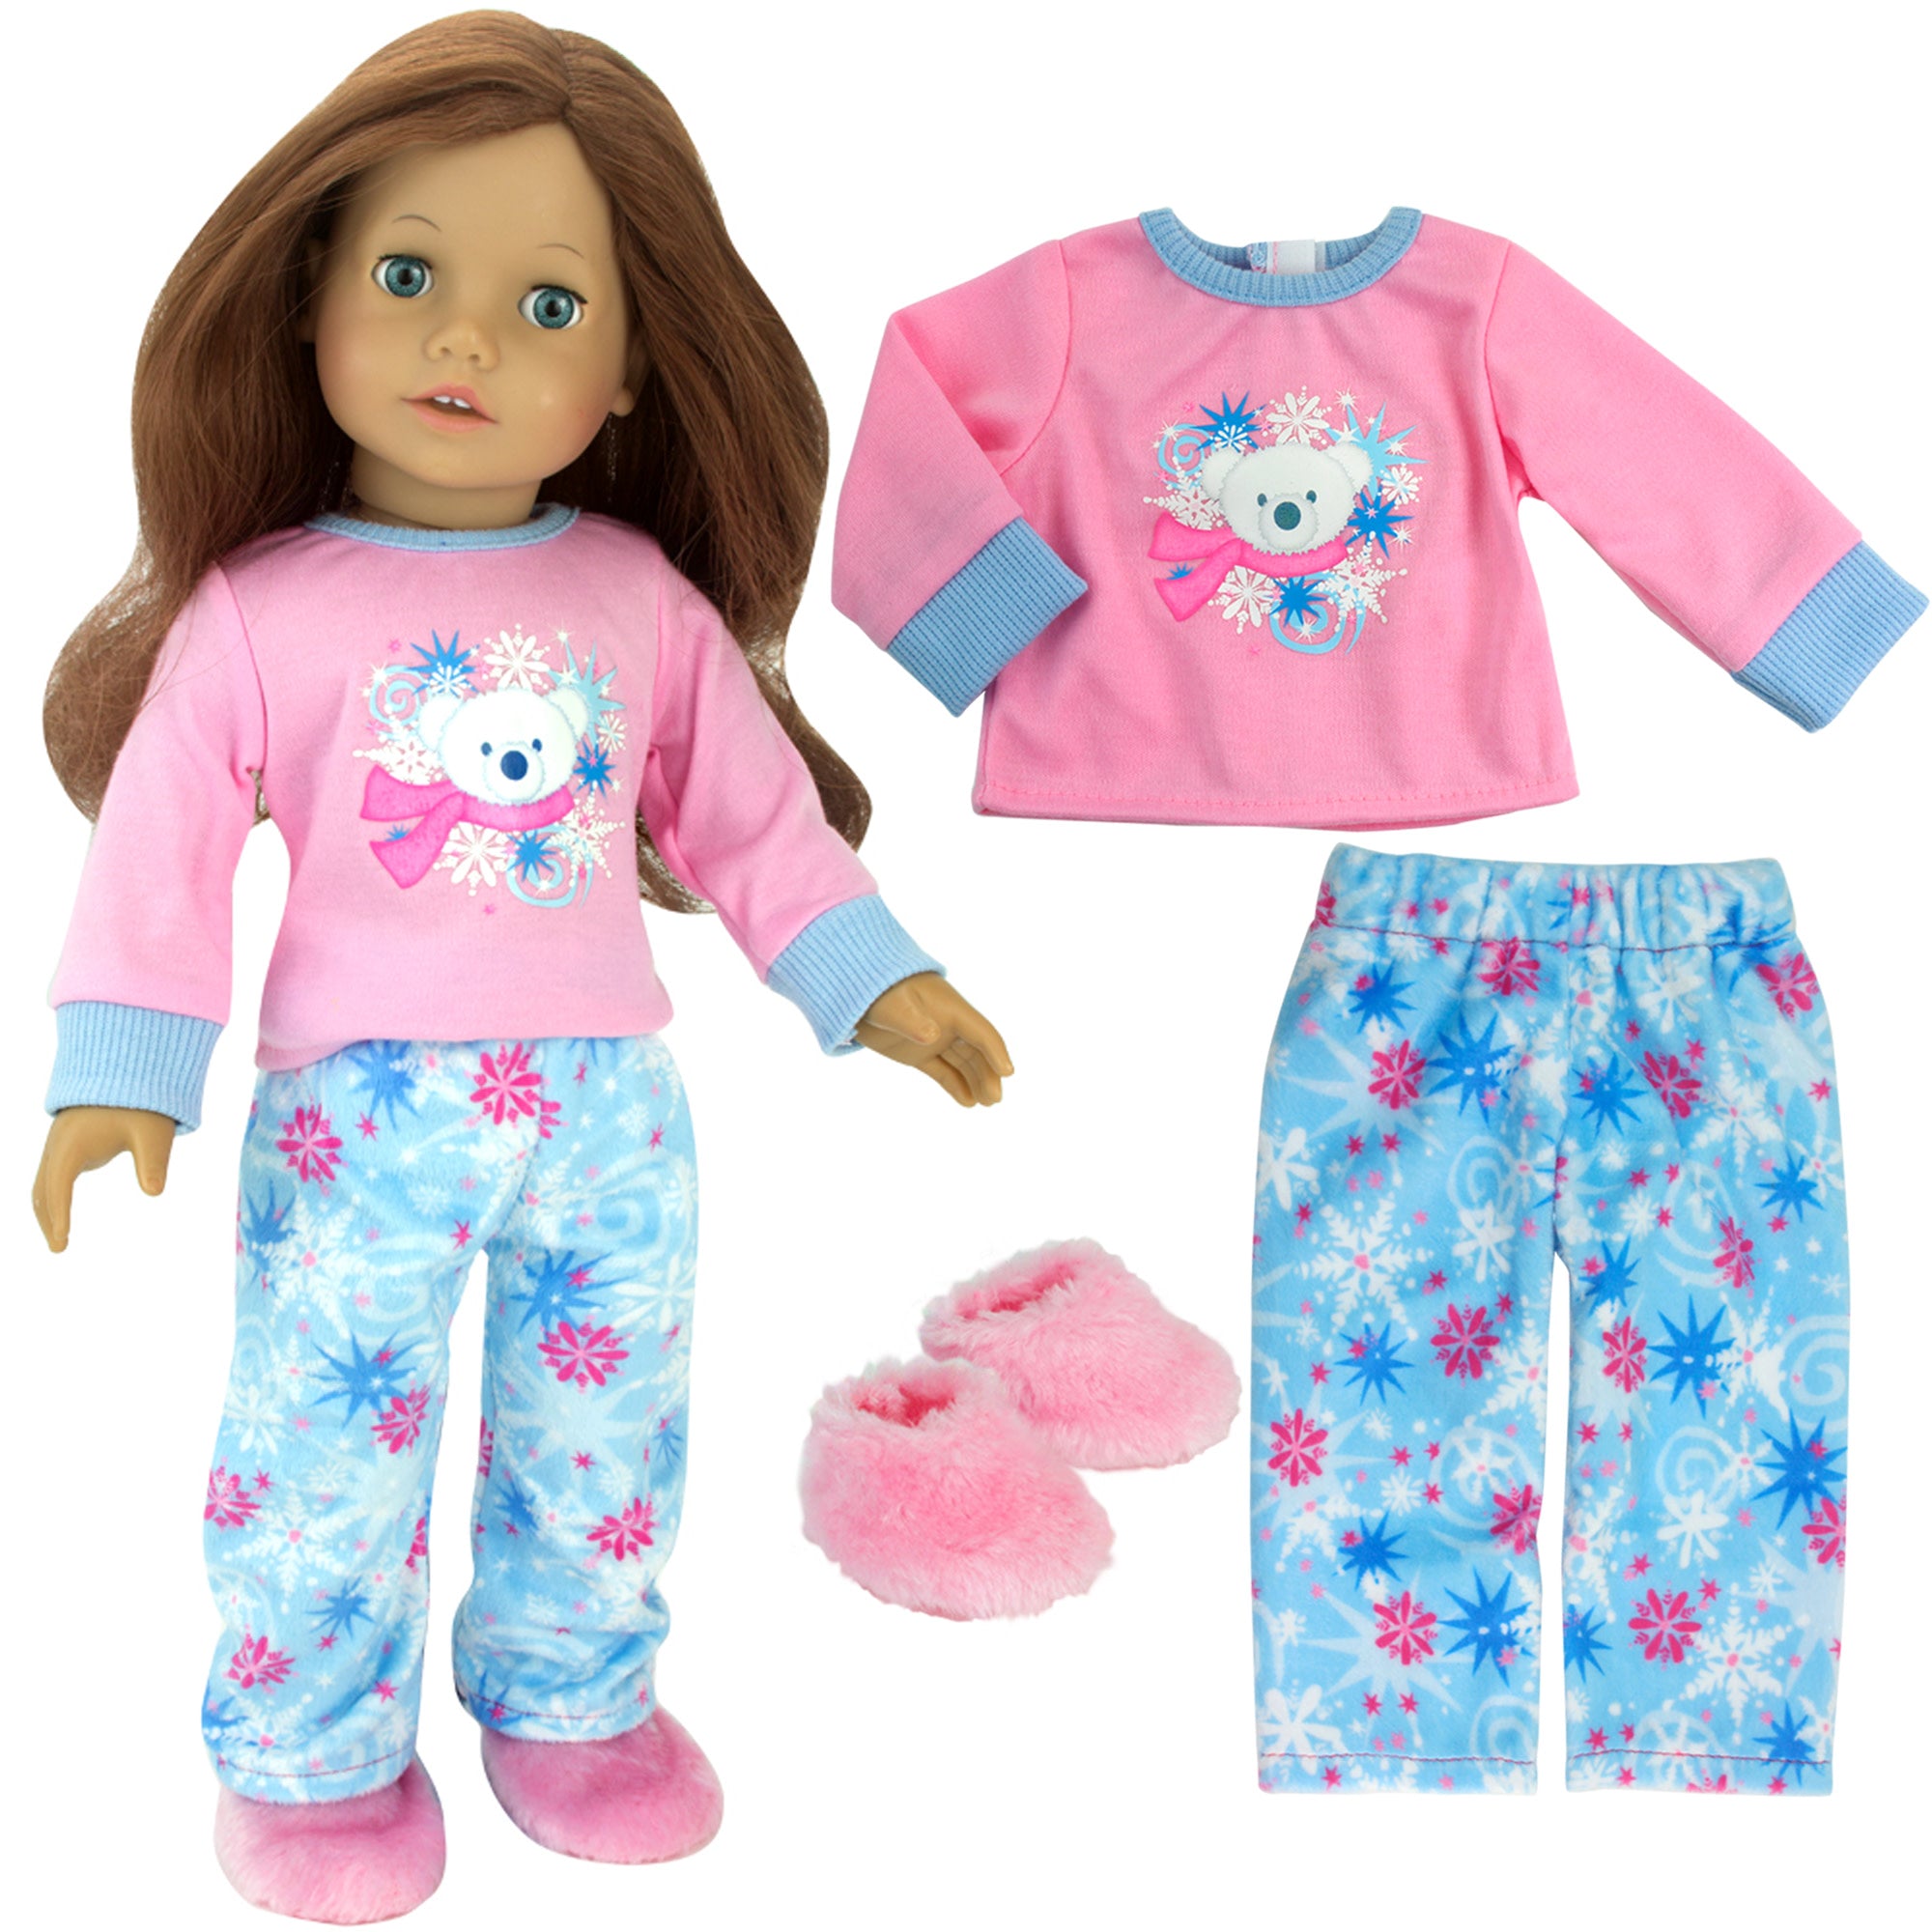 Sophia's 3 Piece Winter Pajamas with Polar Bear Shirt, Fleece Pants and Slippers for 18" Dolls, Pink/Blue